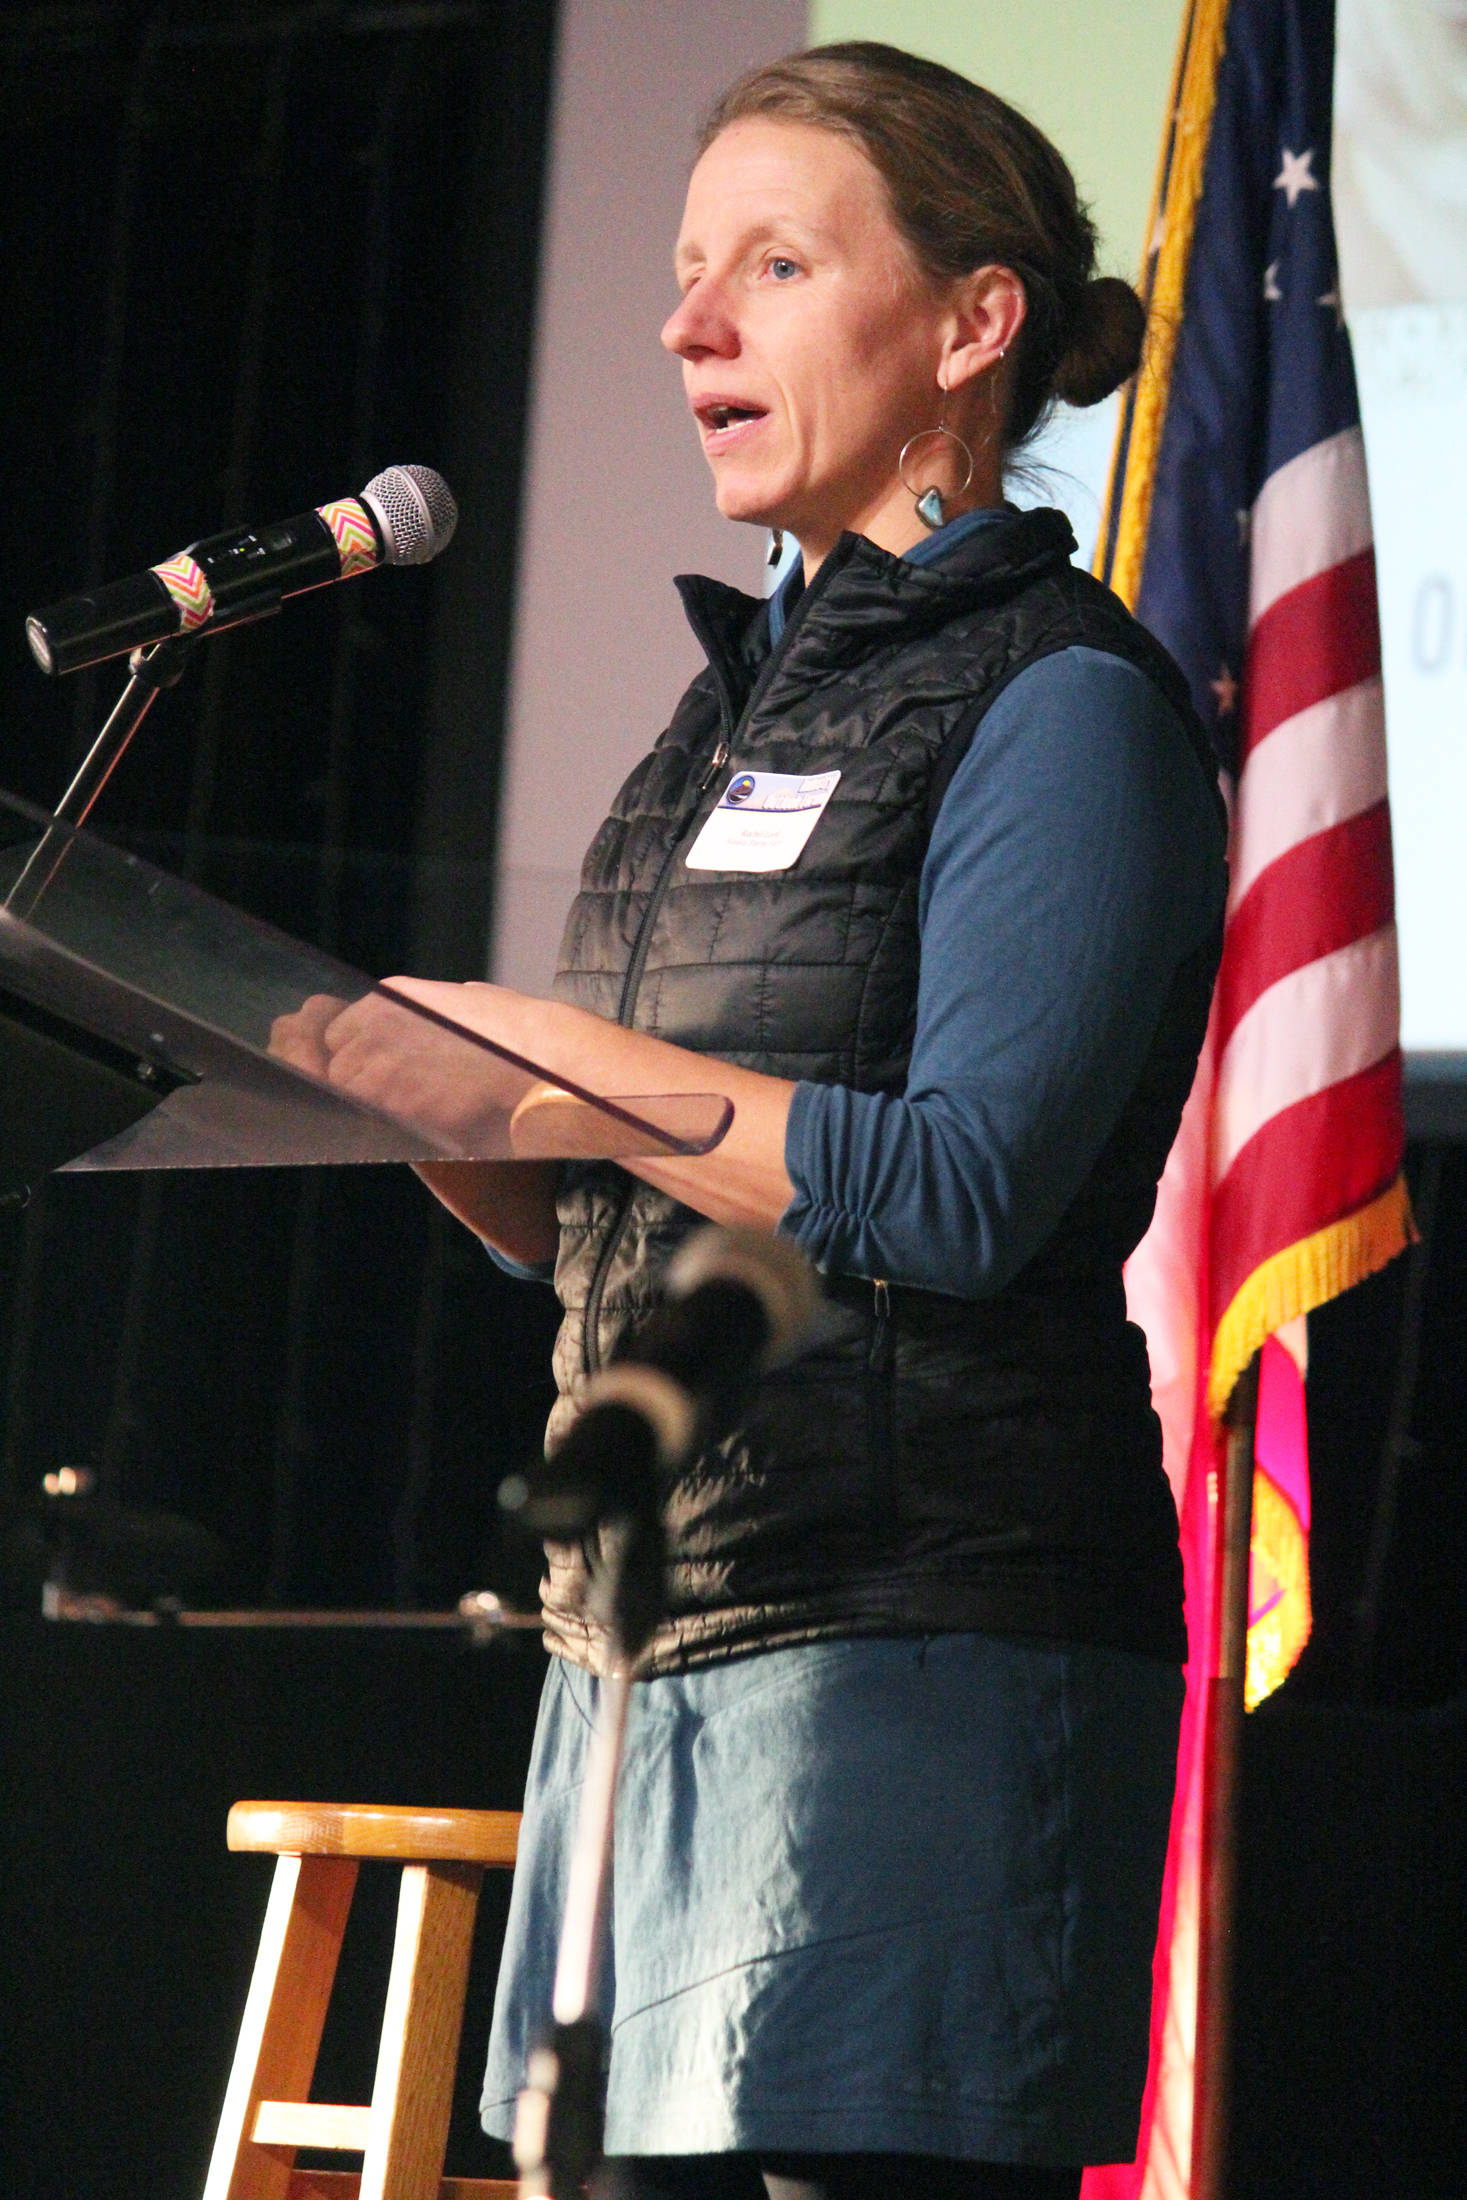 Homer City Council member Rachel Lord, who owns and operates Alaska Stems in Homer with her husband Ben Gibson, speaks to attendees at this year’s Industry Outlook Forum on Wednesday, Jan. 9, 2019 at Christian Community Church in Homer, Alaska. (Photo by Megan Pacer/Homer News)